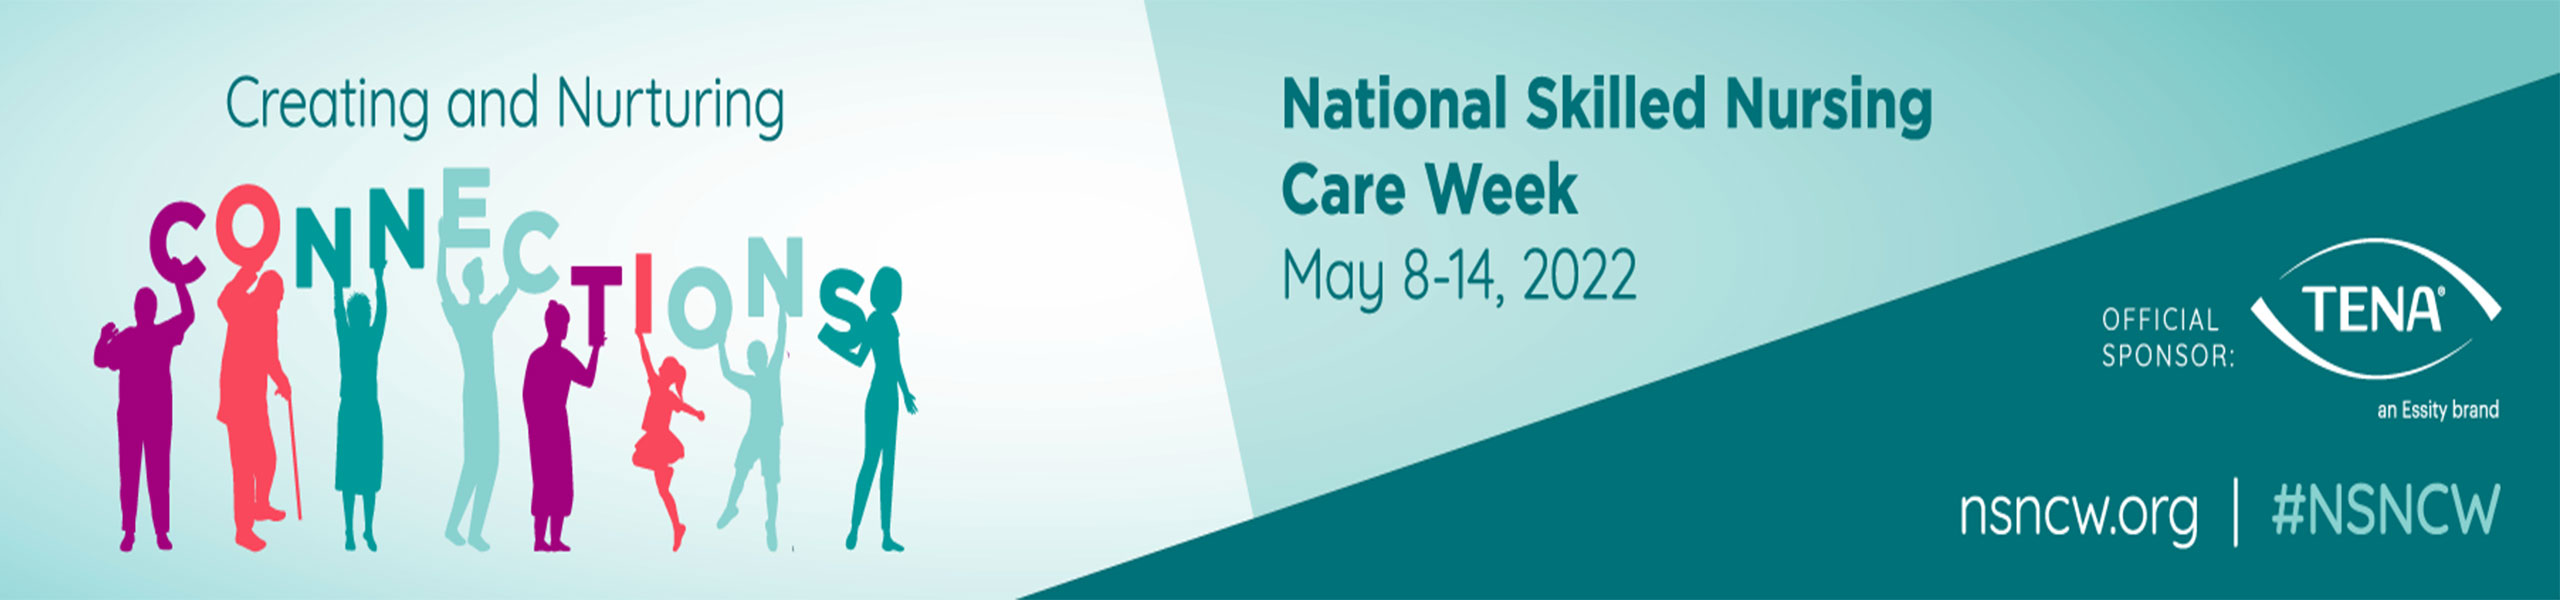 Banner picture of graphic of outlined stick figured people each holding up letters that read:

Creating and Nurturing 
CONNECTIONS

National Skillrd Nursing 
May 8, 14, 2022
OFFICIAL SPONSOR:
TENA
an Essity brand
nsncw.org | #NSNCW